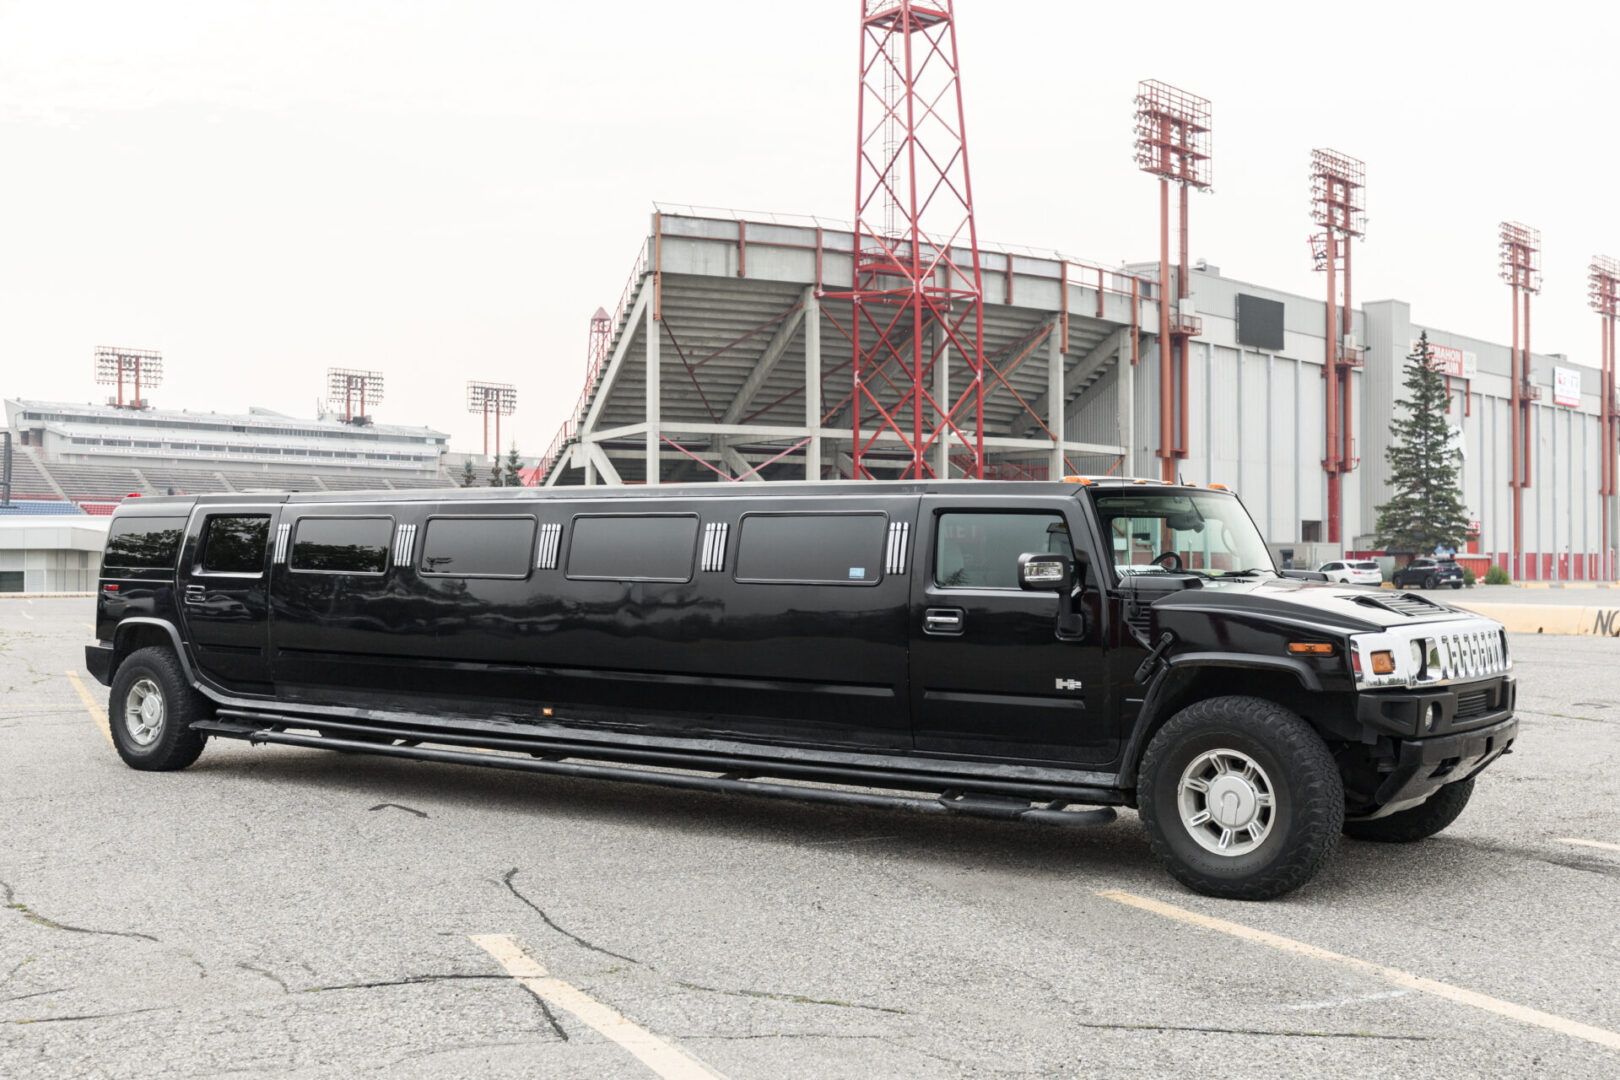 A black hummer limousine parked in front of a stadium